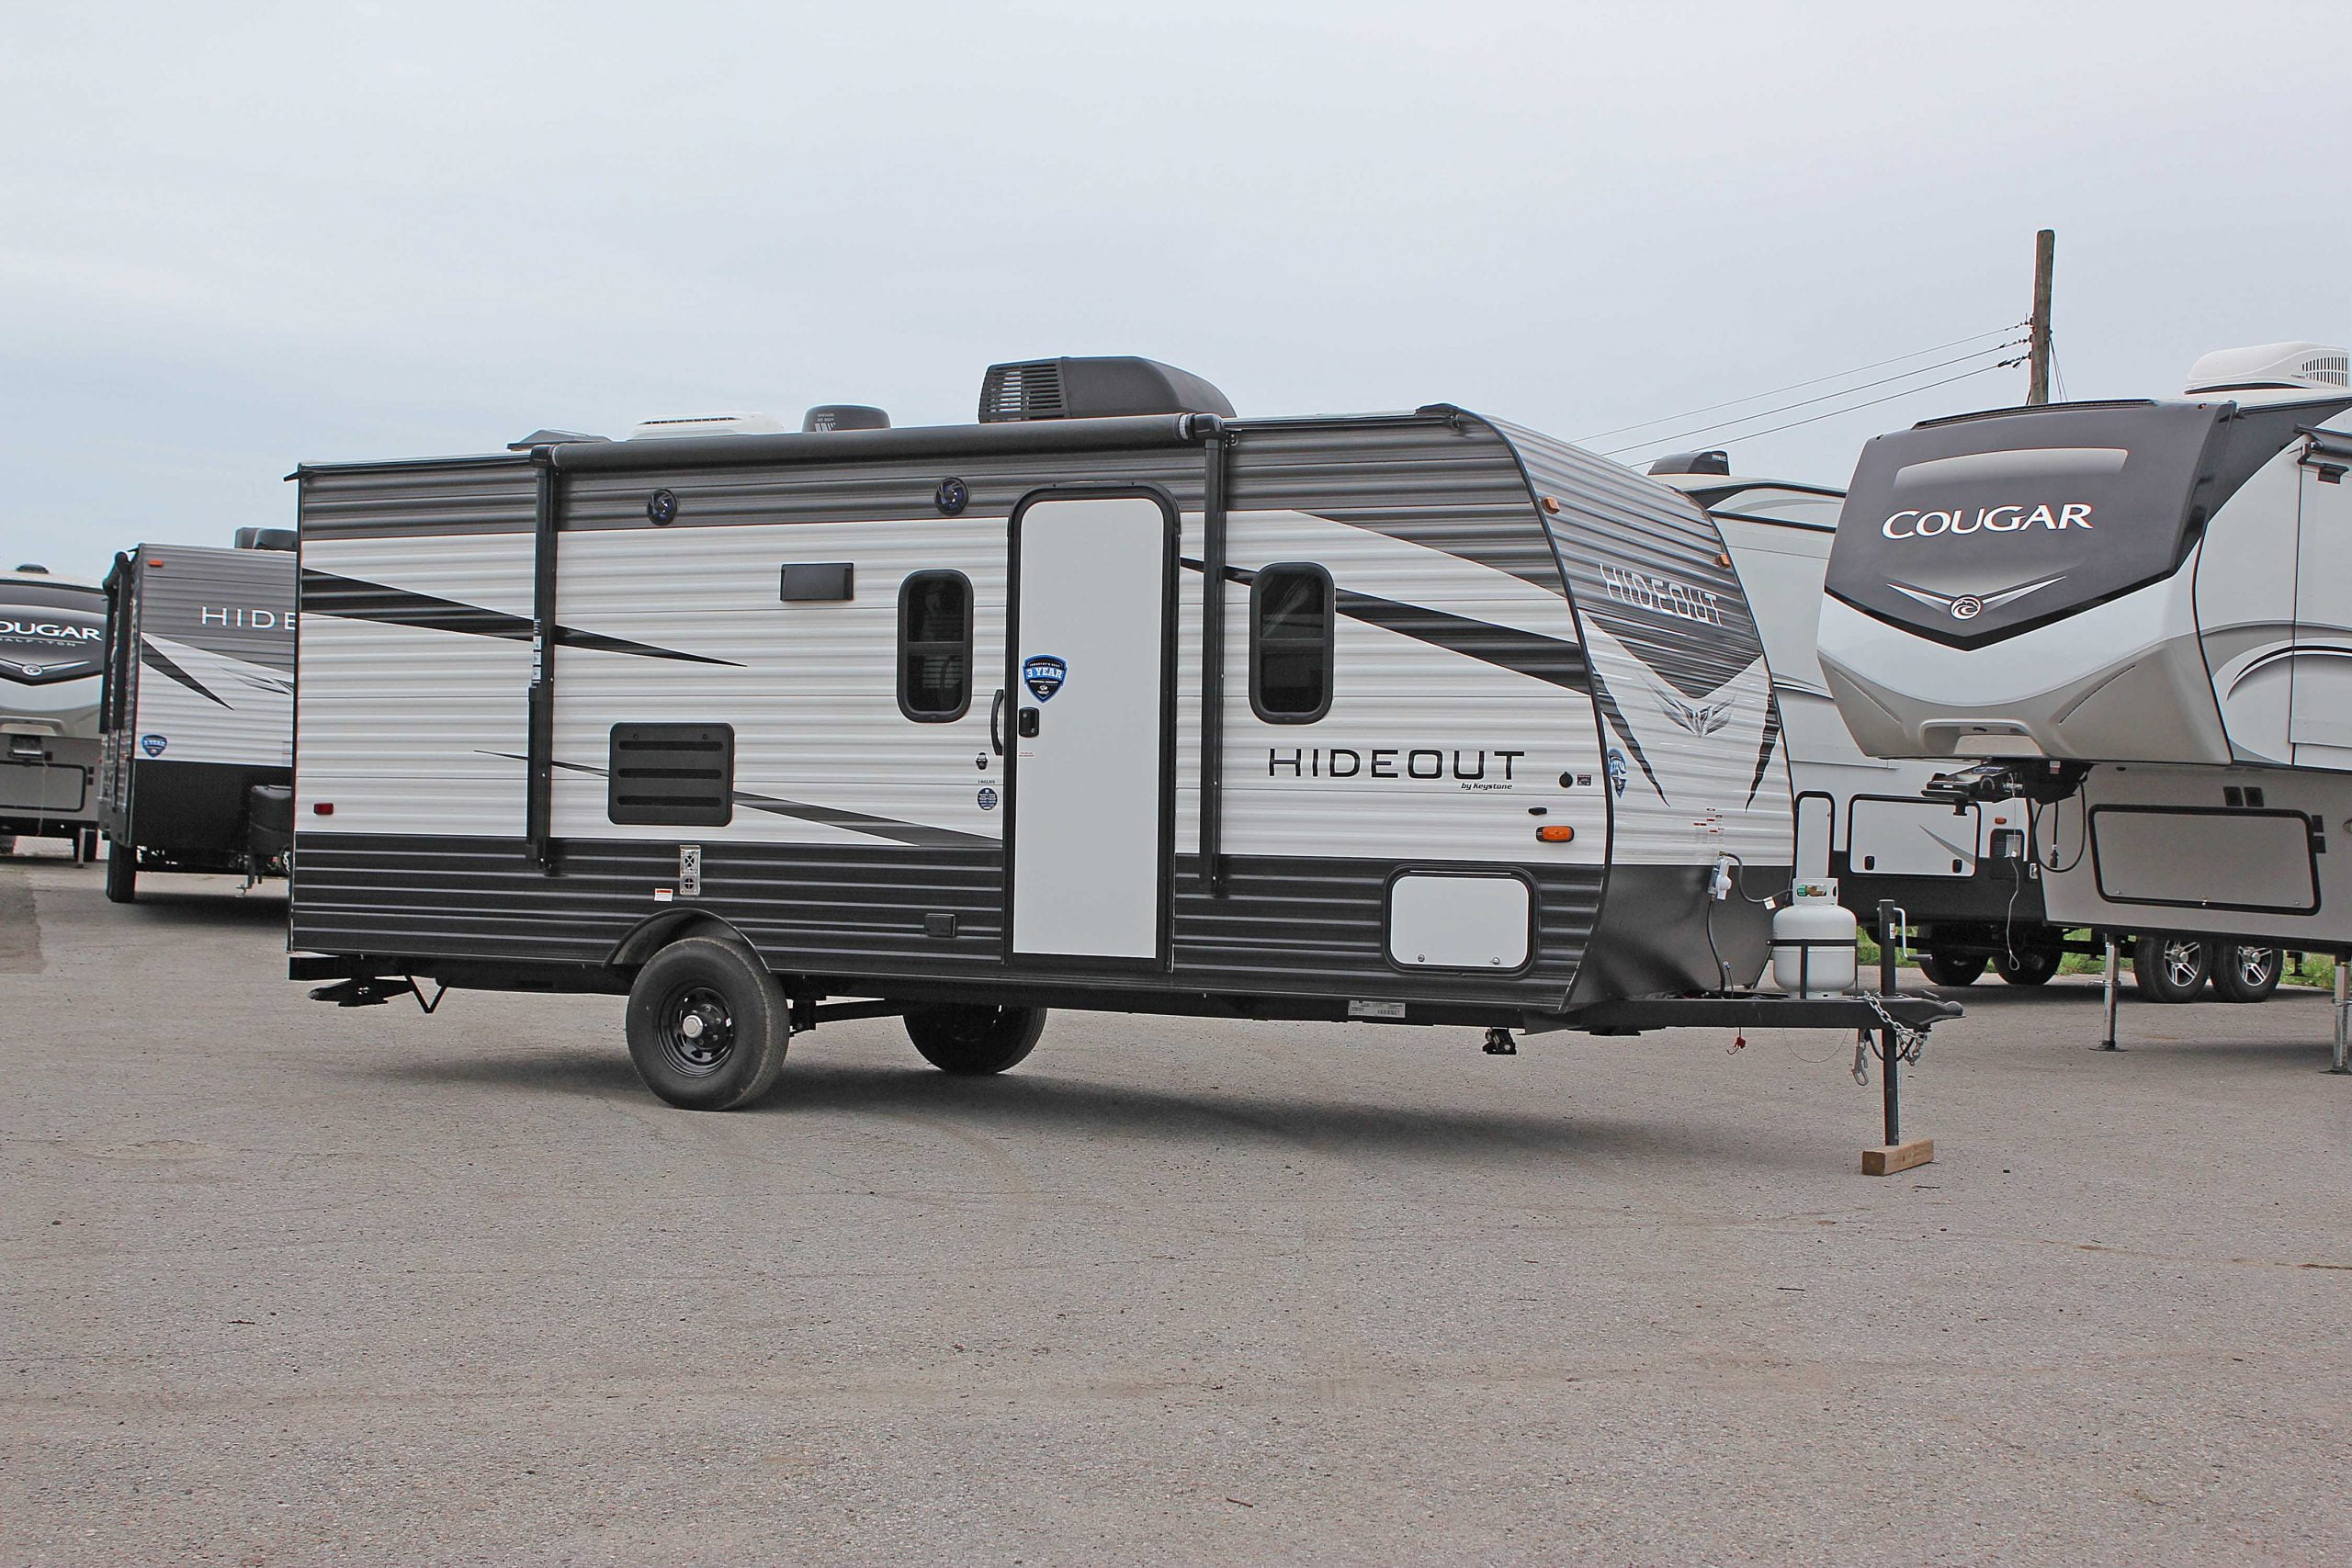 2020 Keystone Hideout 186LS: A Family-Friendly Travel Trailer for The Is A Keystone Hideout A Good Rv